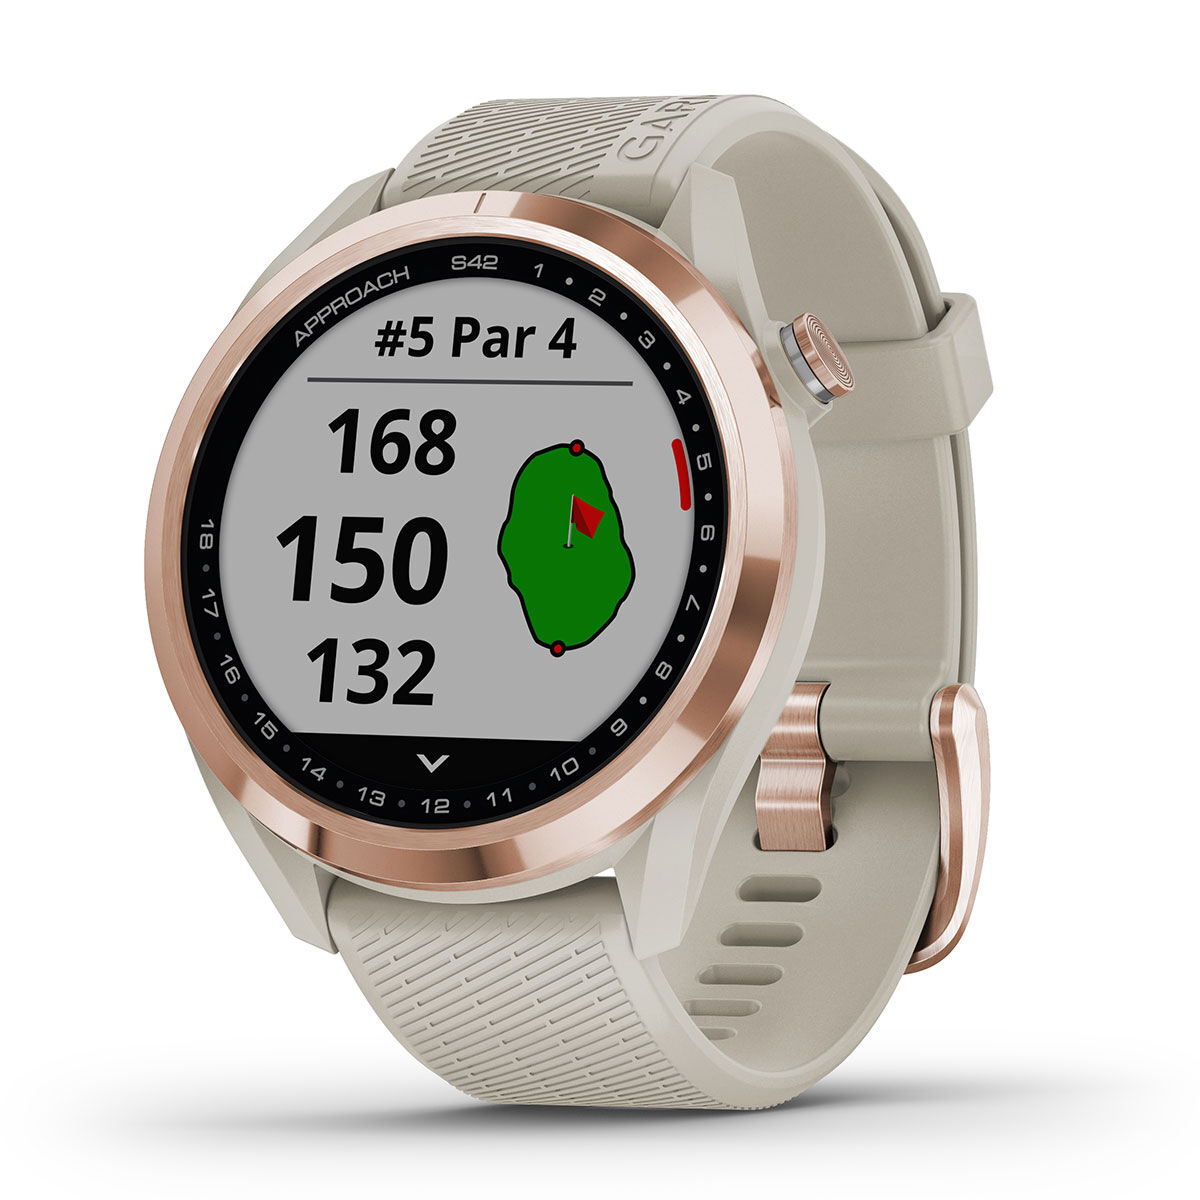 Garmin Rose Gold and Beige Approach S42 Golf GPS Watch| American Golf, One Size